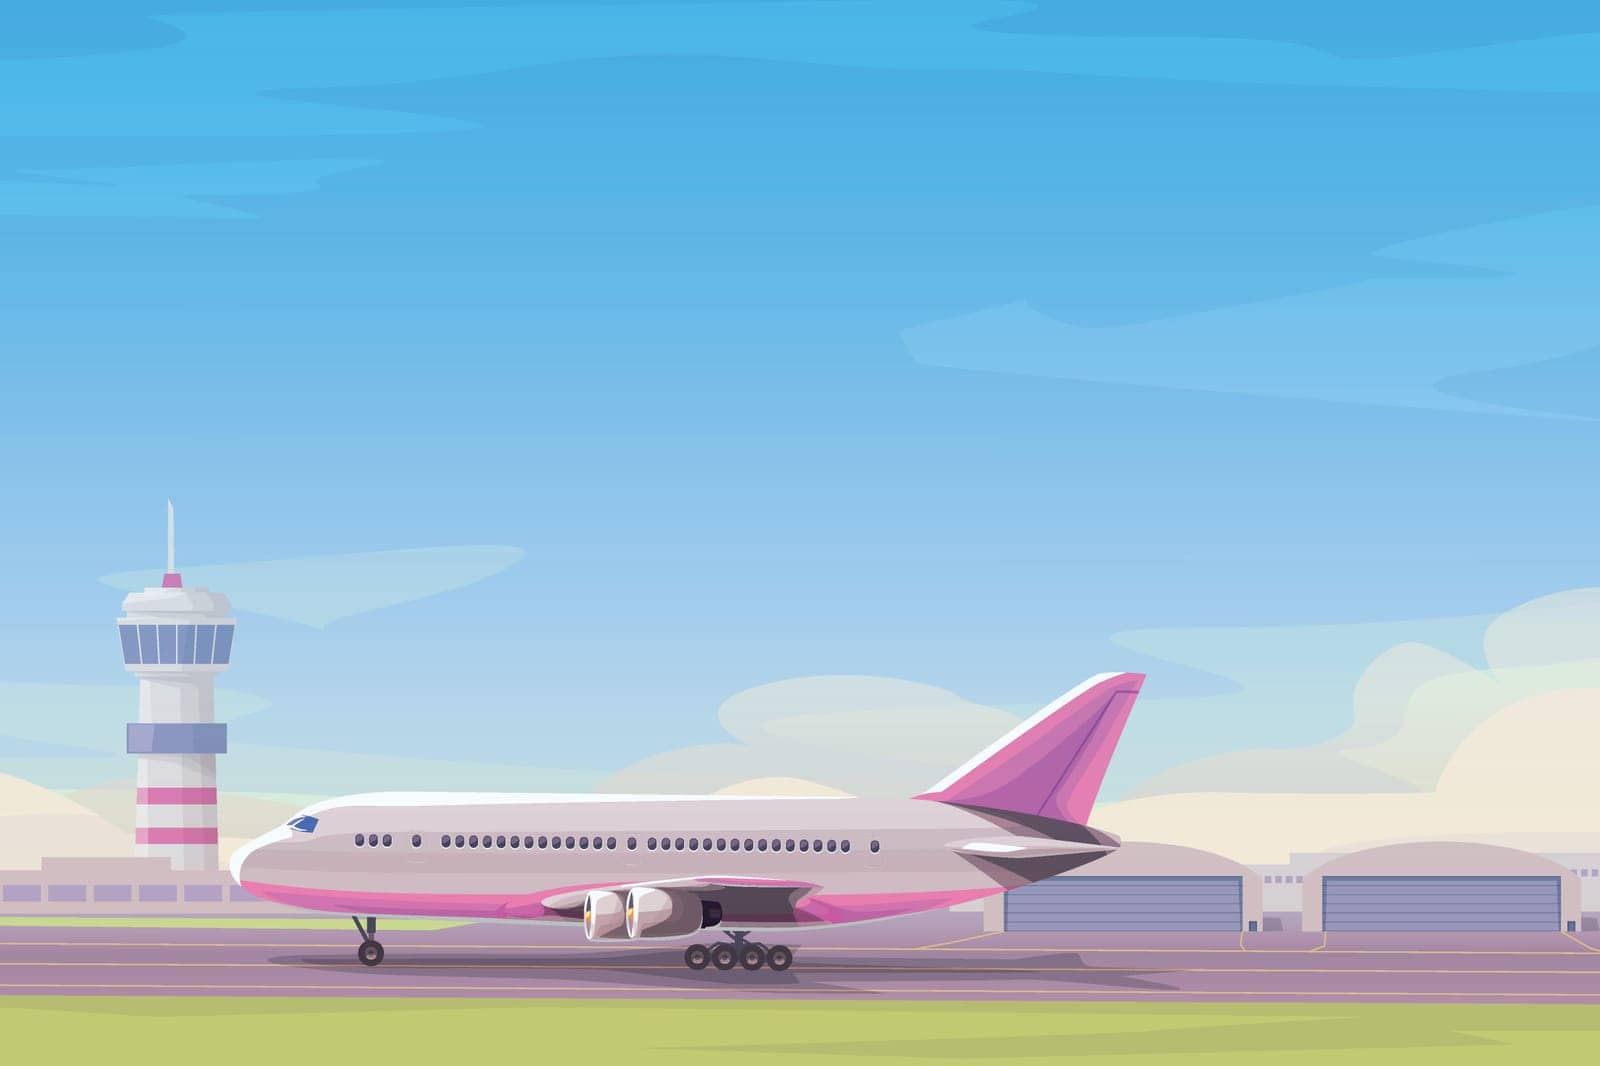 illustration of modern commercial airplane side view on runway at airport